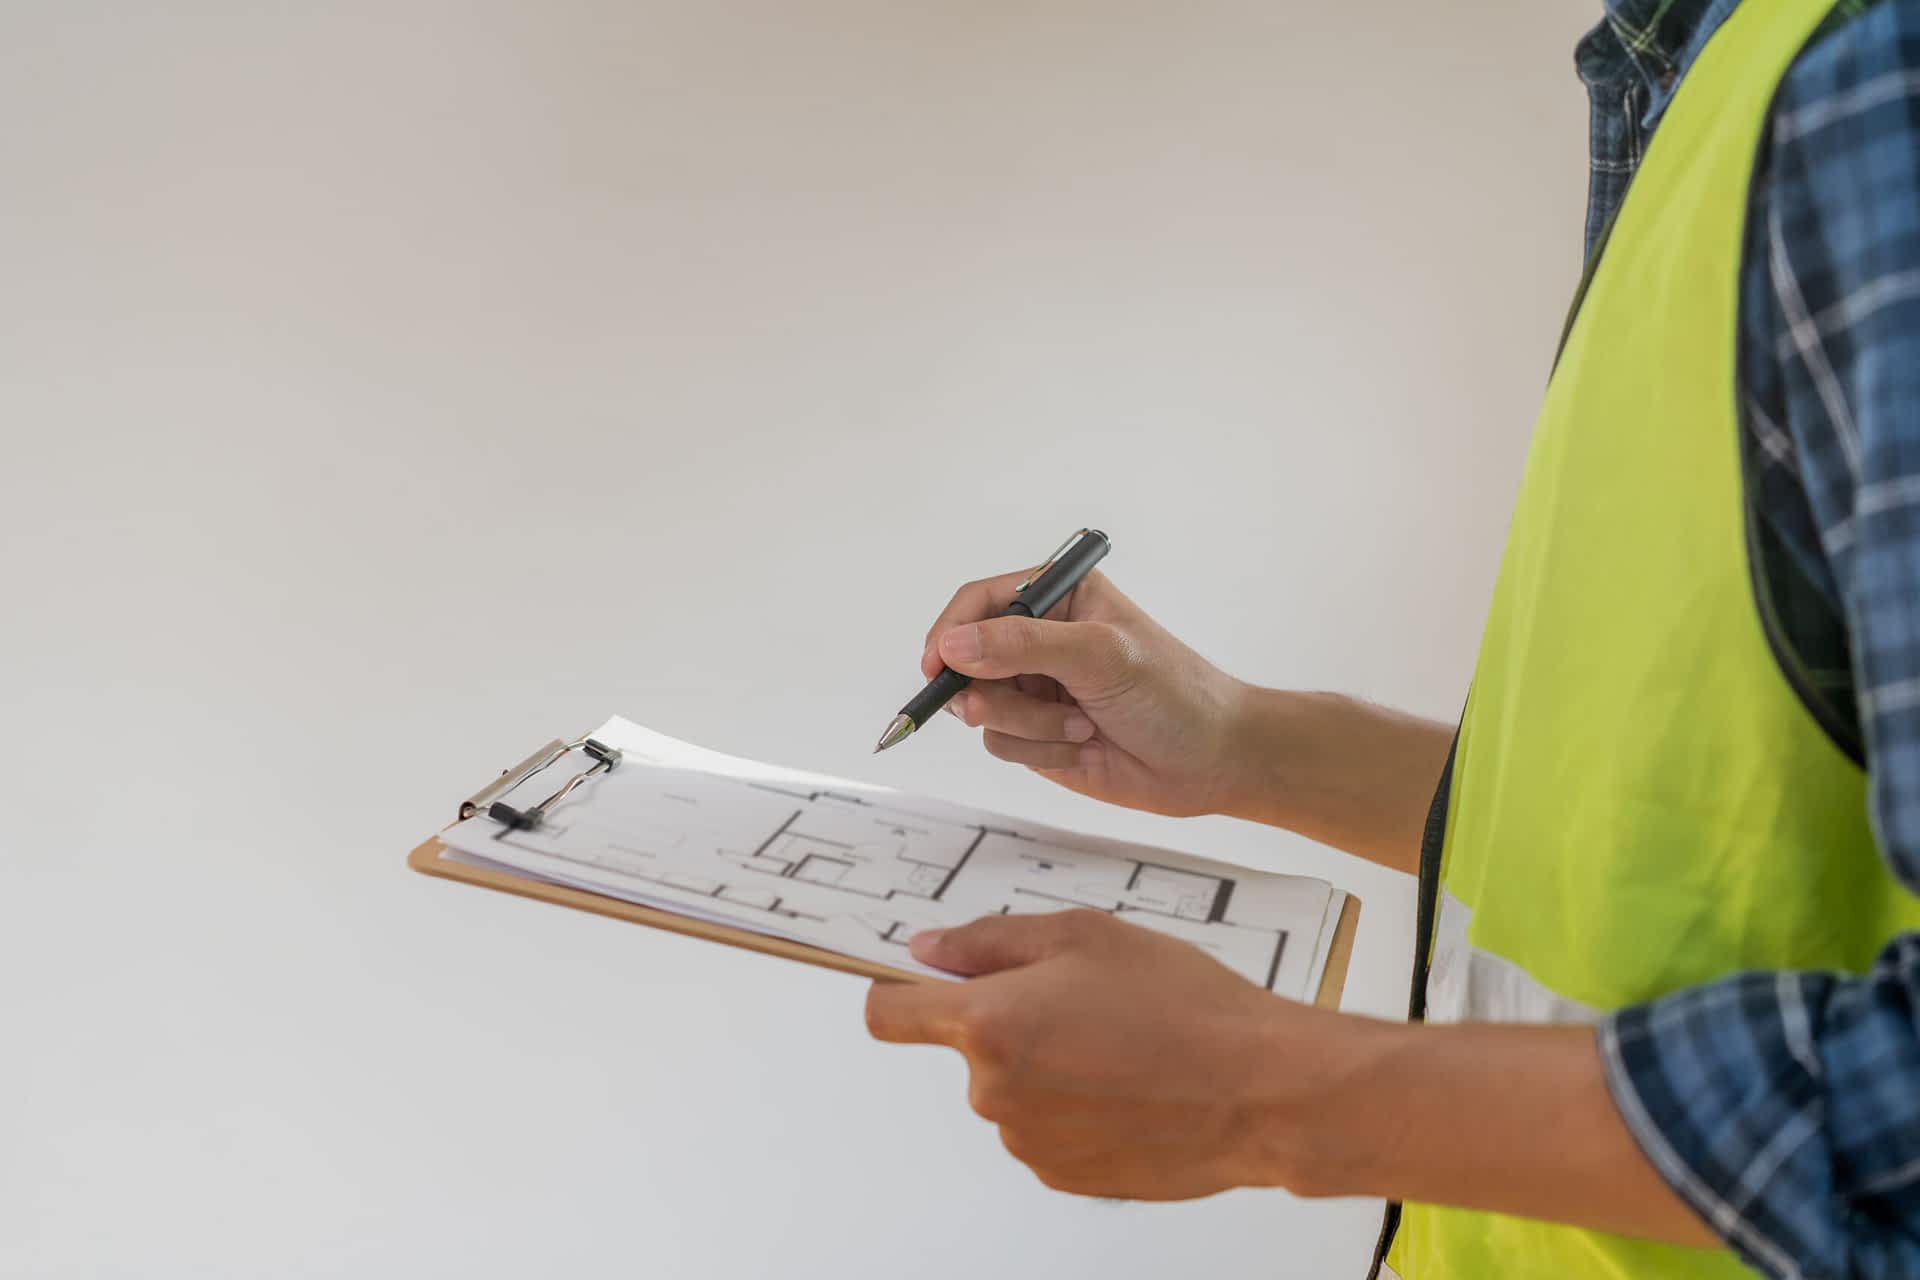 Crawl Space Support Contractor New York - A Man with a Yellow Vest on Holding a Clipboard and Pen